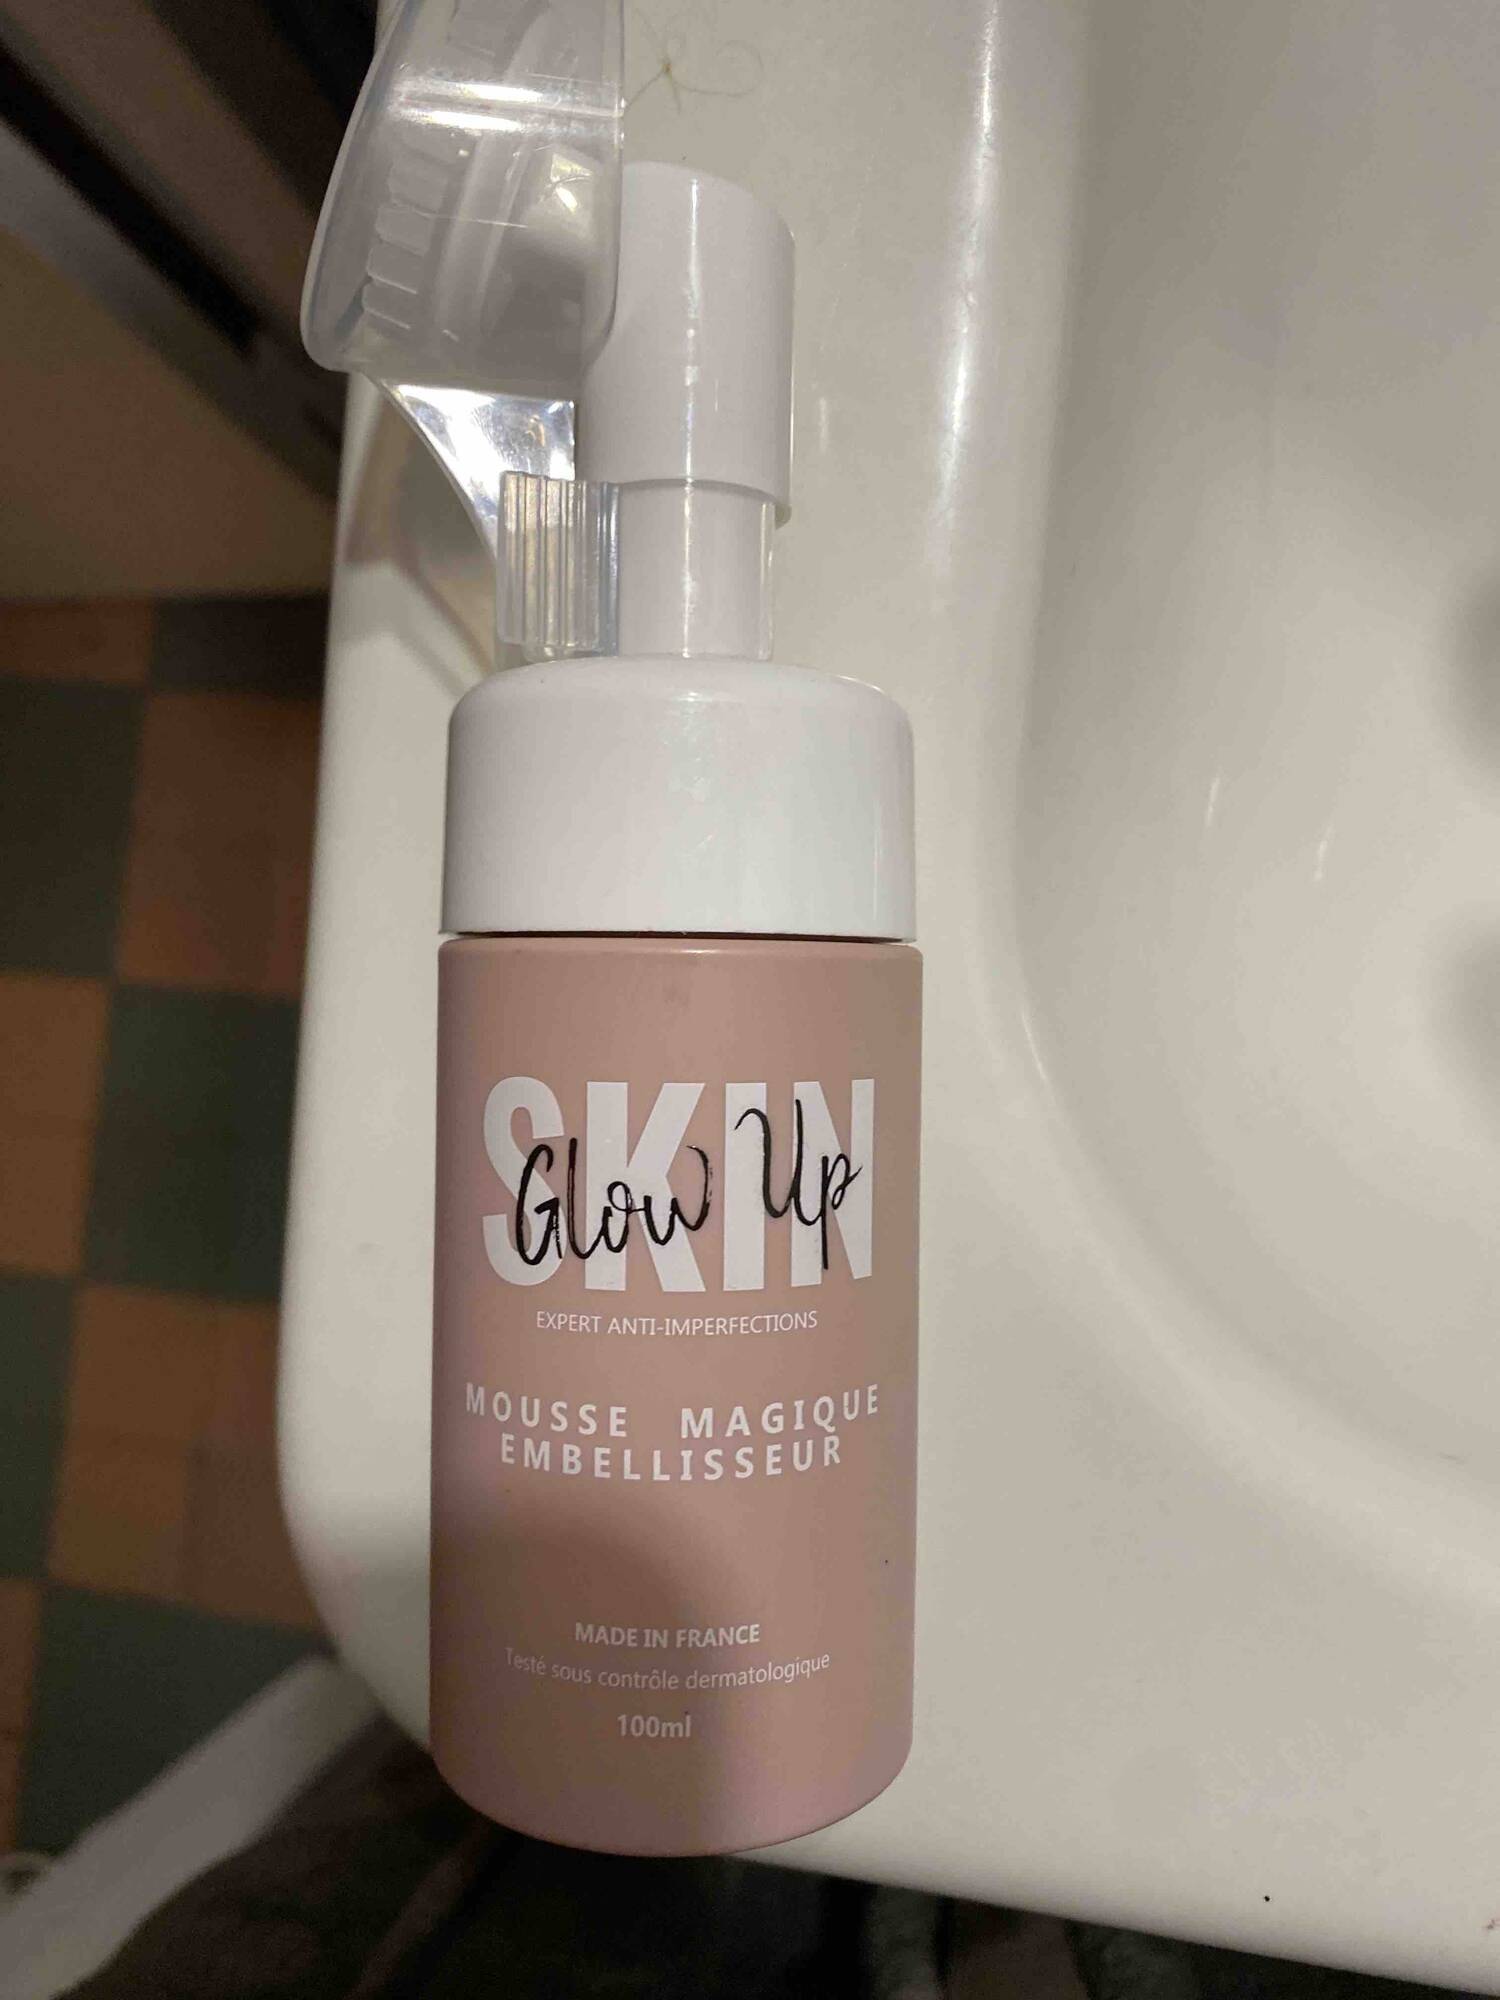 SKIN GLOW UP - Expert anti-imperfections - Mousse magique embellisseur